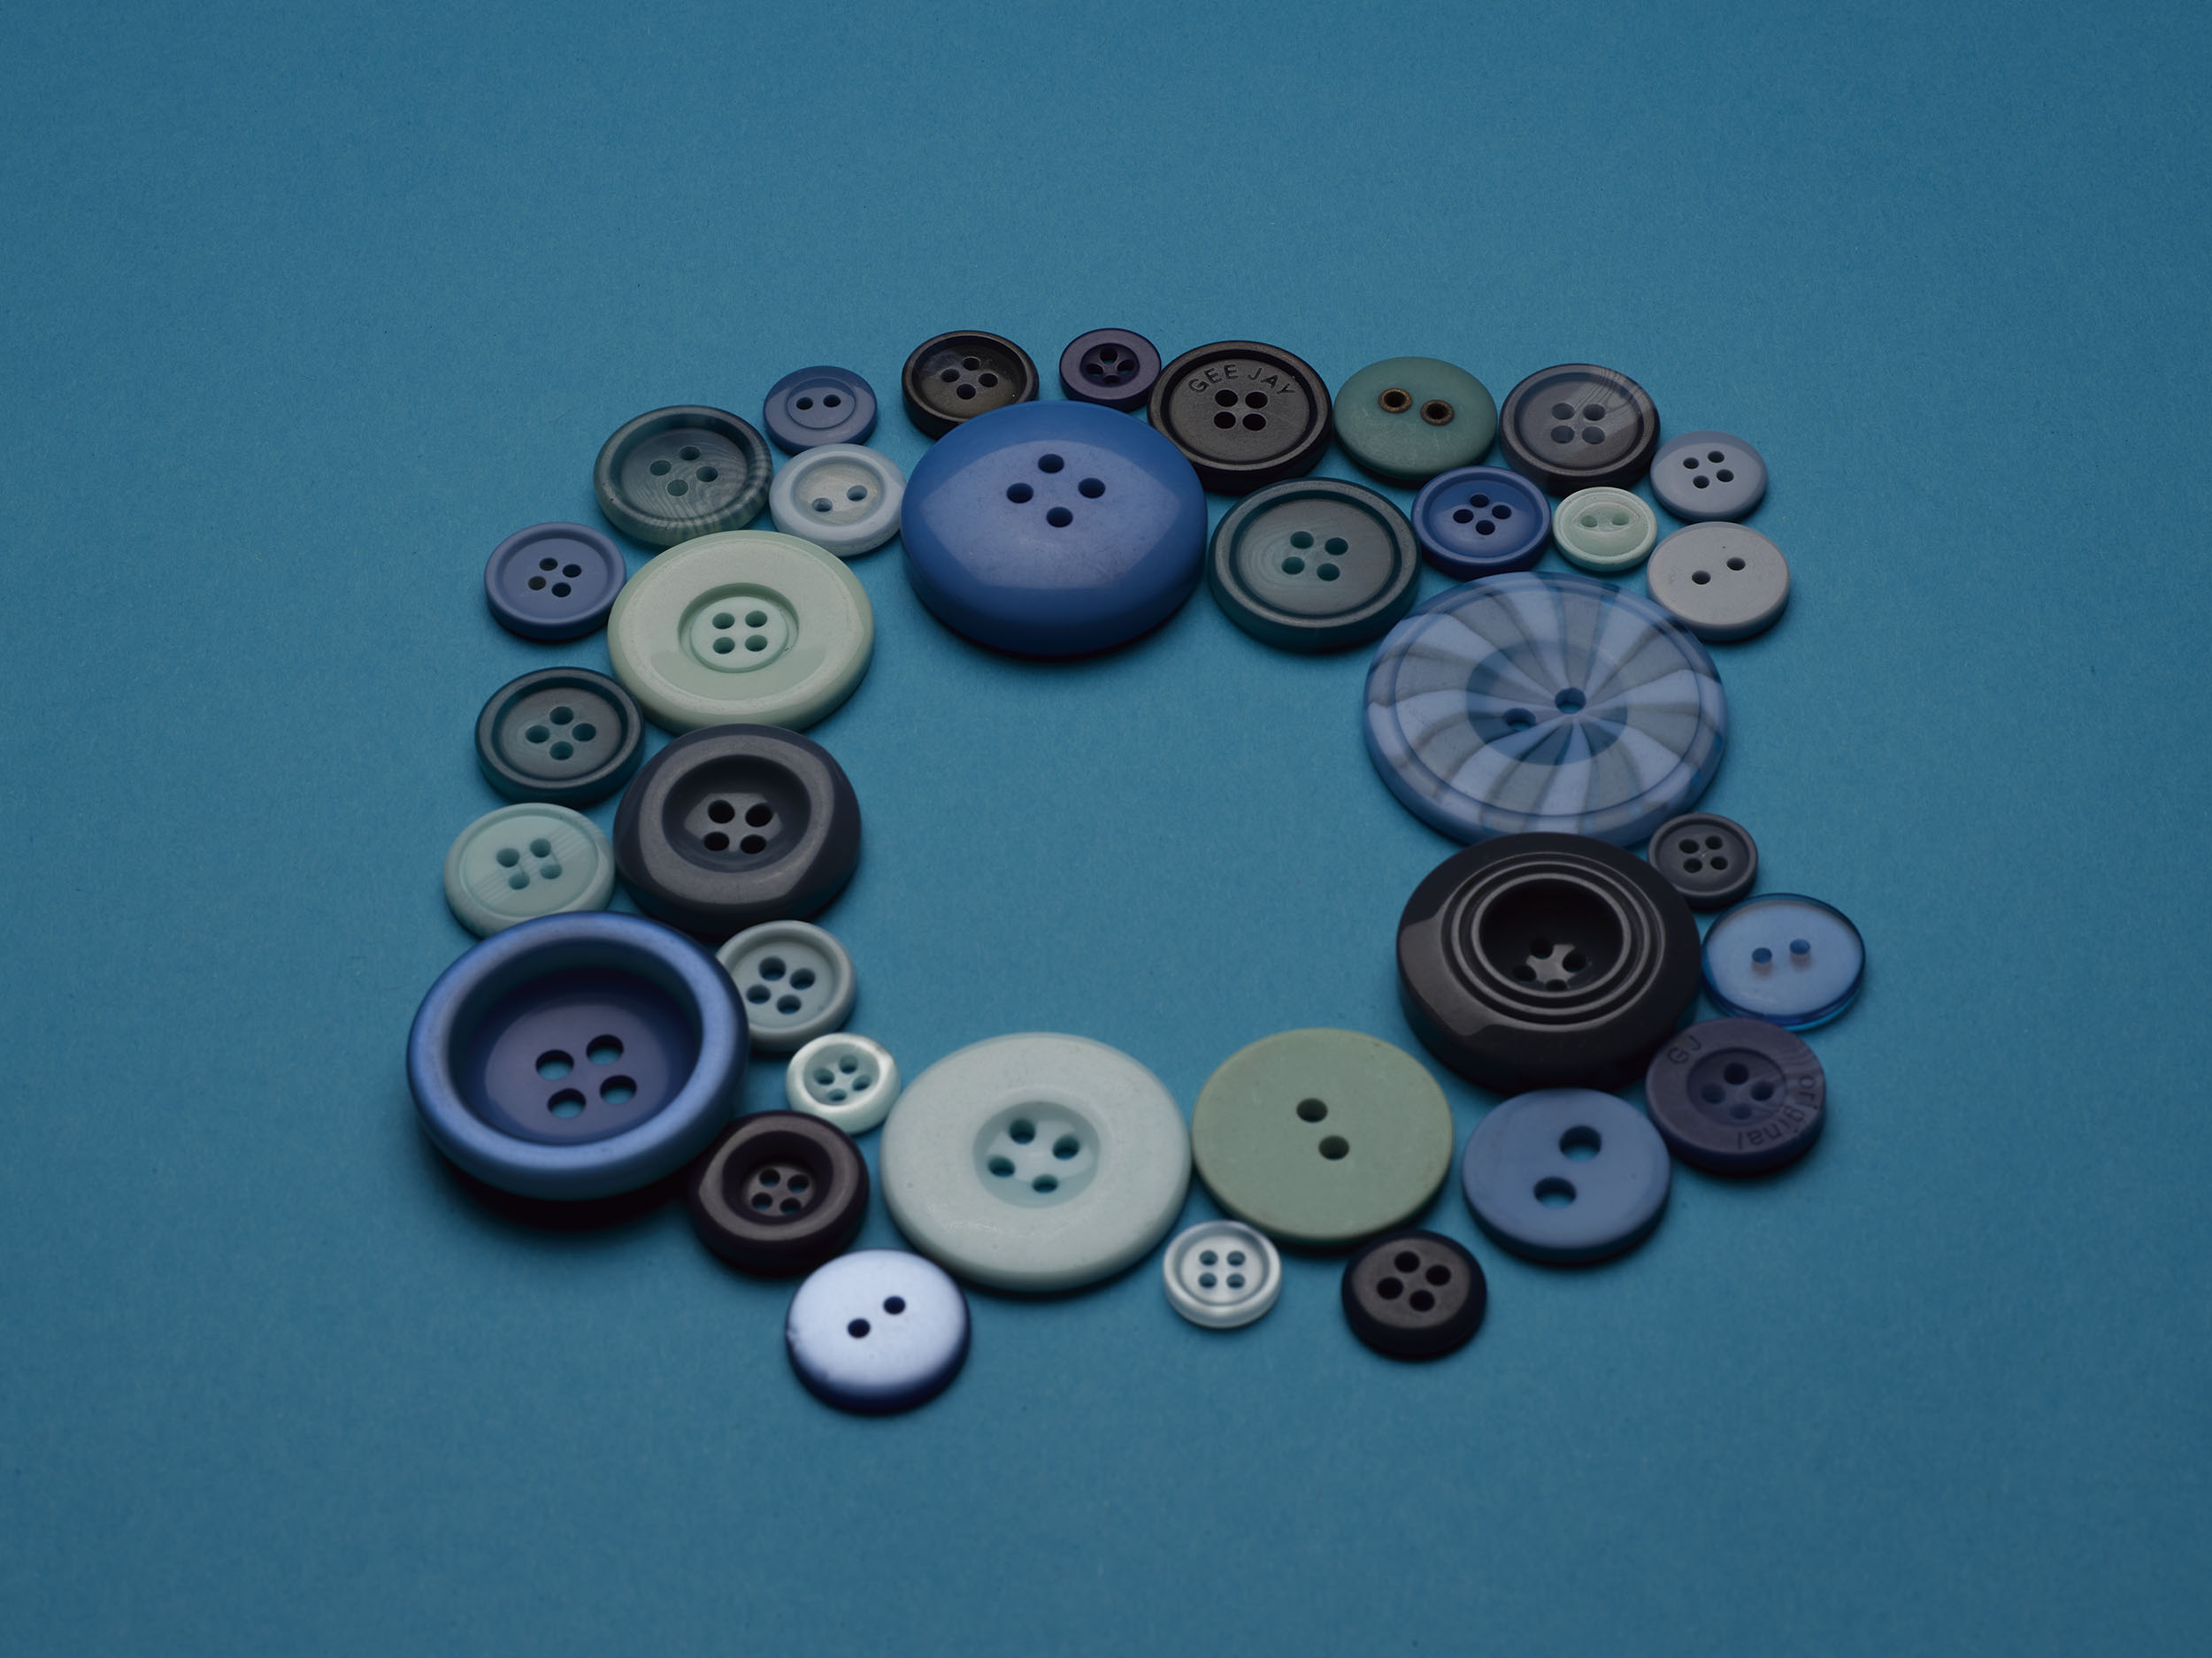 Photograph by Rhianna Cleaveley of different shades of blue buttons forming a square shape.